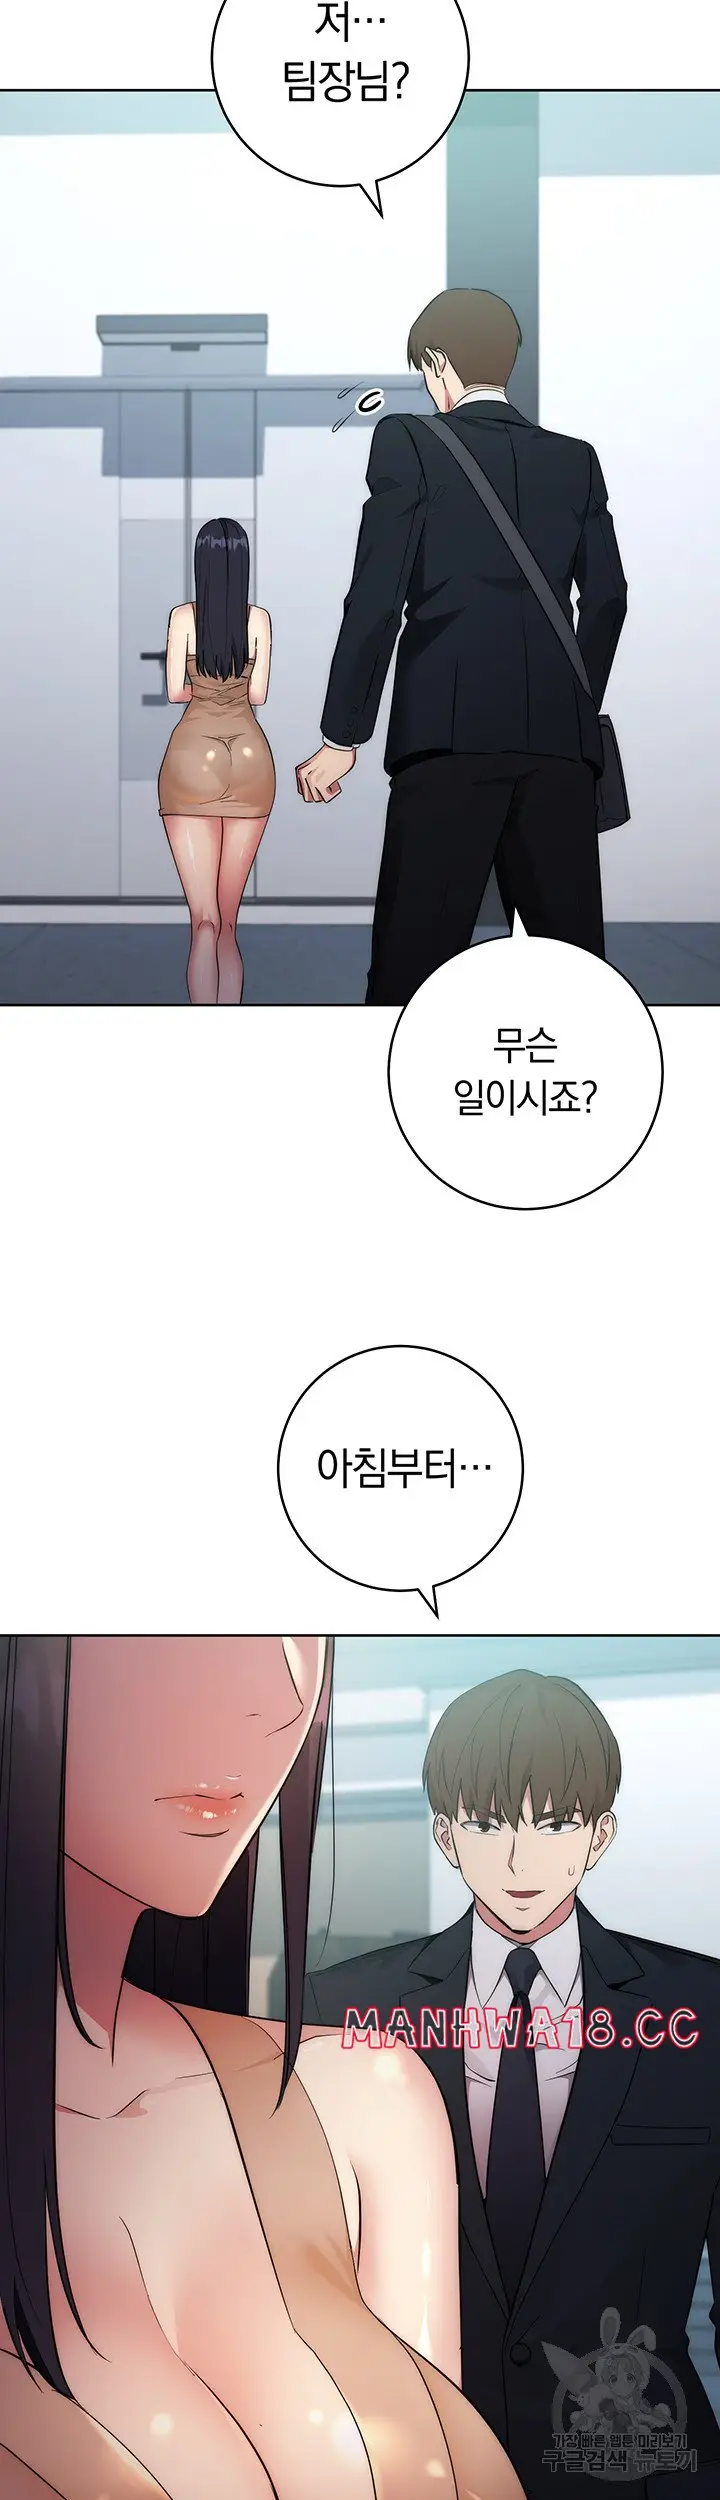 outsider-the-invisible-man-raw-chap-3-71